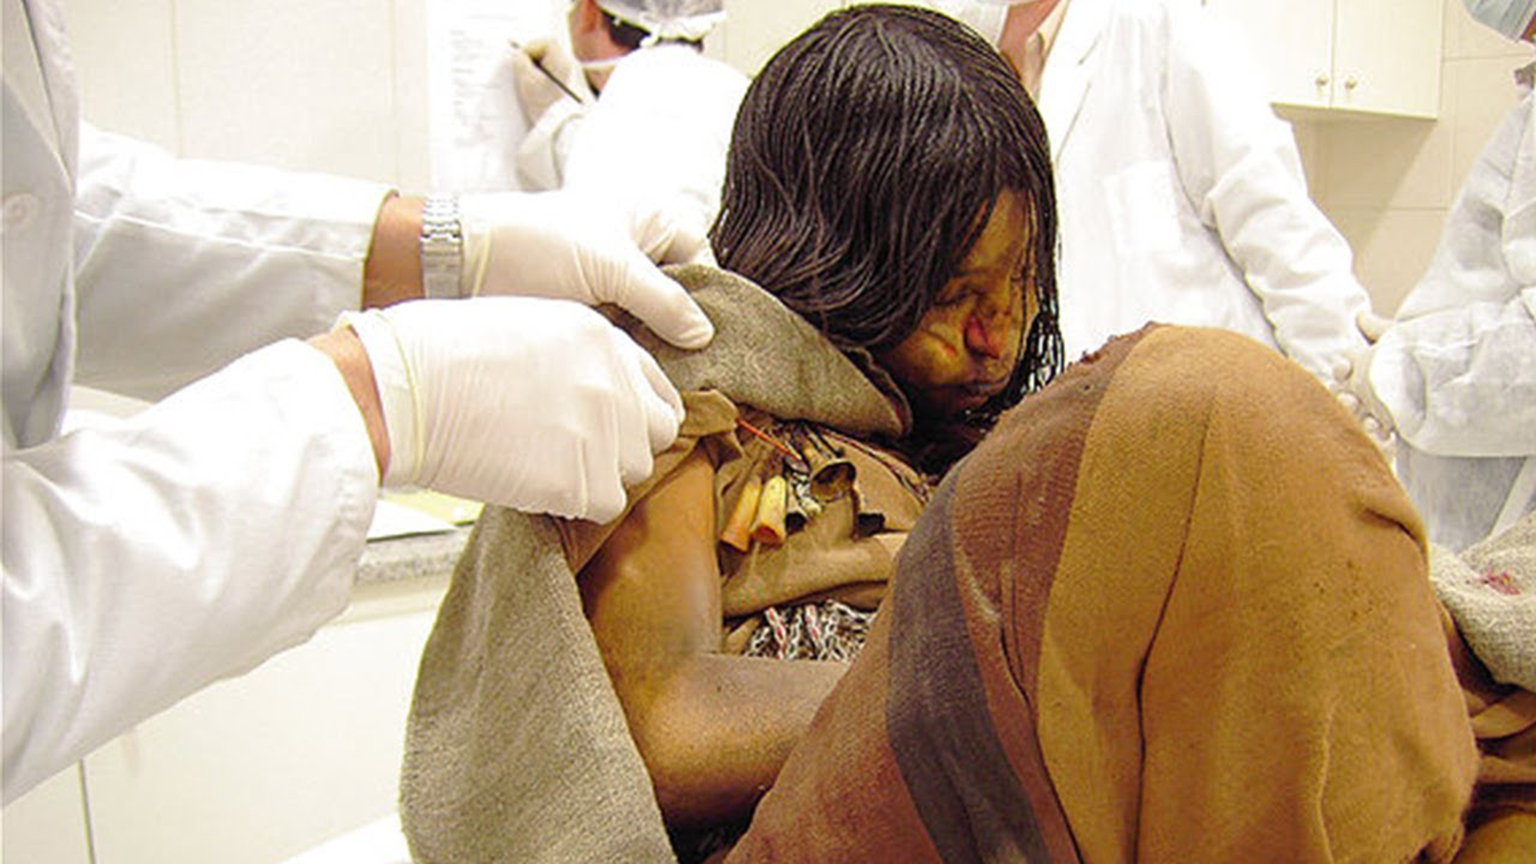 Mummified 13 year old girl with her clothes and hair intact